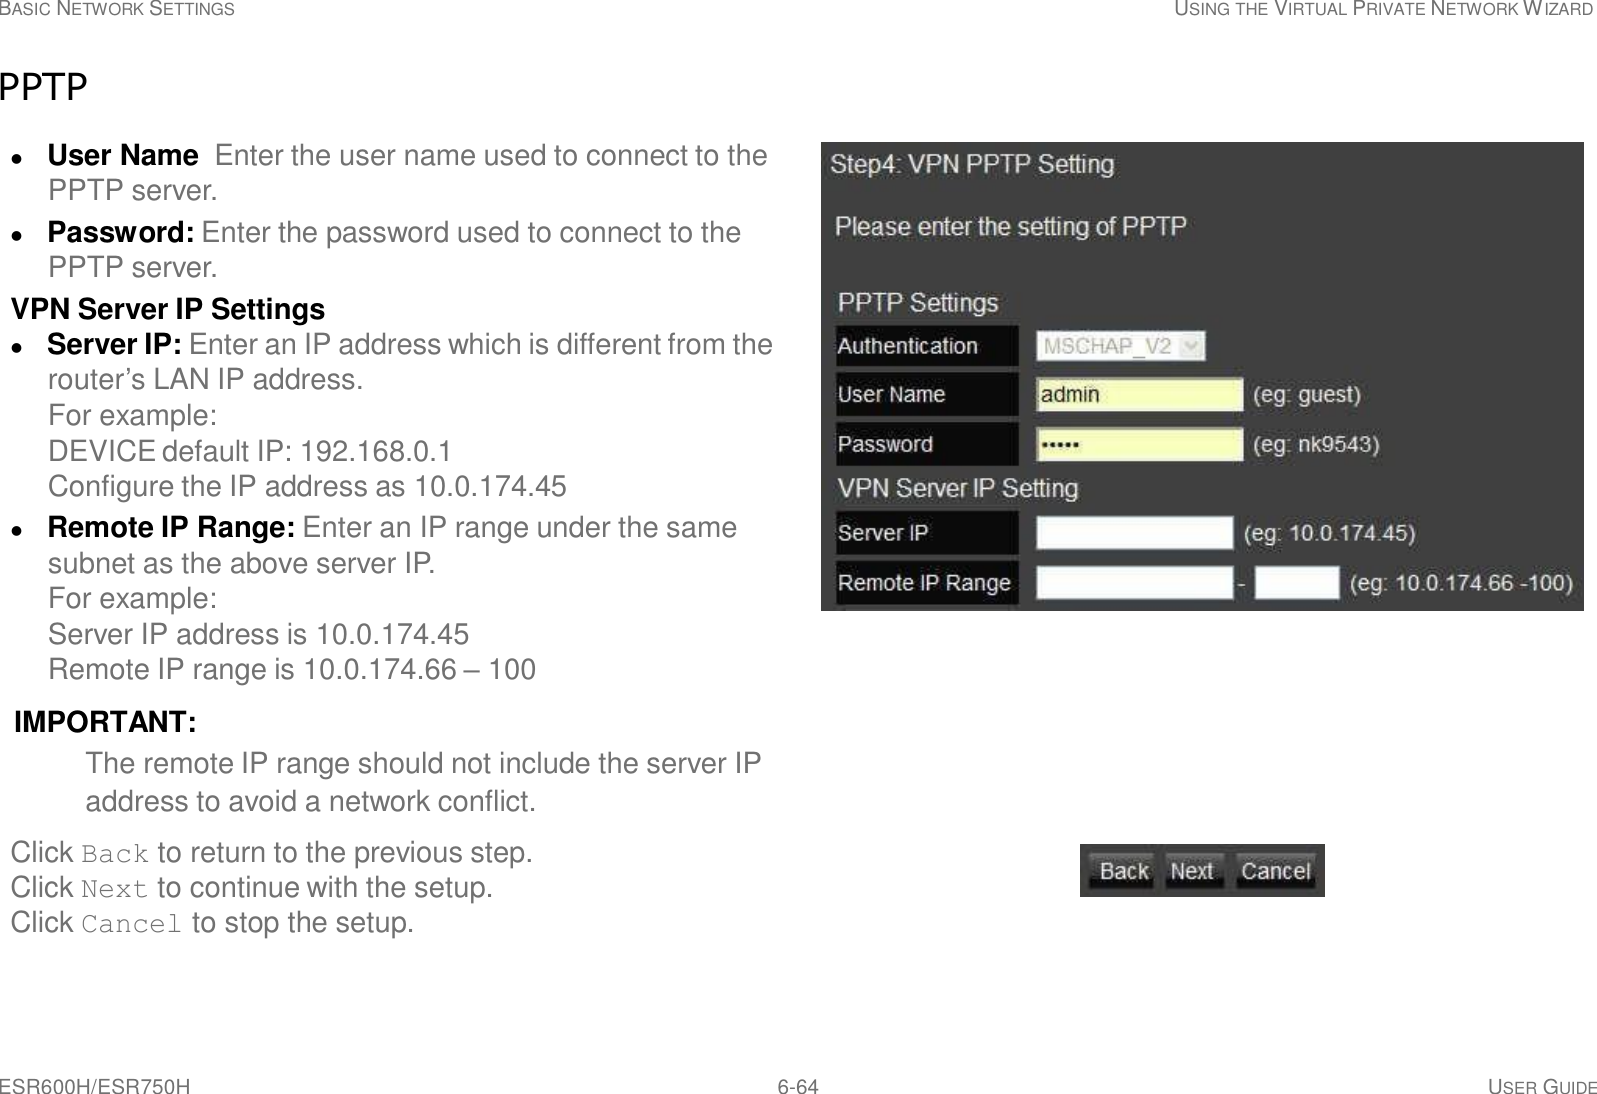 ESR600H/ESR750H 6-64 USER GUIDE   BASIC NETWORK SETTINGS USING THE VIRTUAL PRIVATE NETWORK WIZARD   PPTP   User Name  Enter the user name used to connect to the PPTP server.  Password: Enter the password used to connect to the PPTP server. VPN Server IP Settings  Server IP: Enter an IP address which is different from the router’s LAN IP address. For example: DEVICE default IP: 192.168.0.1 Configure the IP address as 10.0.174.45  Remote IP Range: Enter an IP range under the same subnet as the above server IP. For example: Server IP address is 10.0.174.45 Remote IP range is 10.0.174.66 – 100  IMPORTANT: The remote IP range should not include the server IP address to avoid a network conflict.  Click Back to return to the previous step. Click Next to continue with the setup. Click Cancel to stop the setup. 